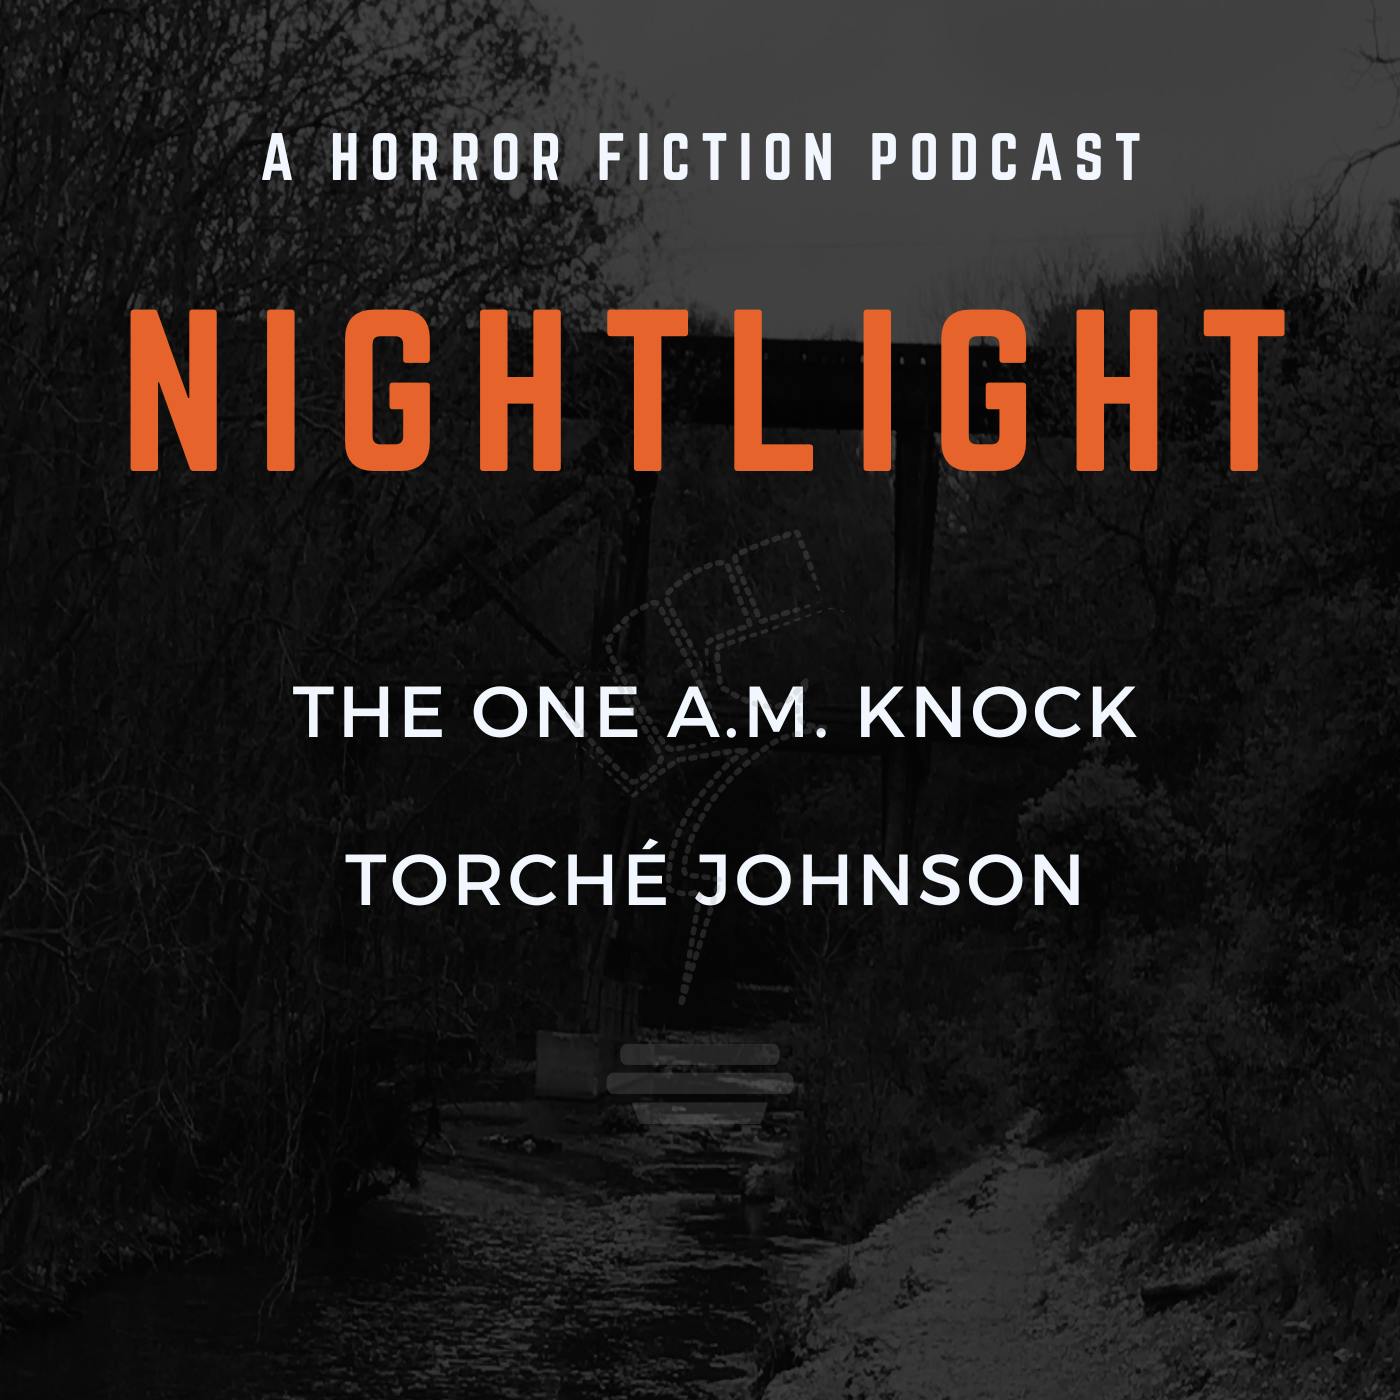 623: The One A.M. Knock by Torché Johnson